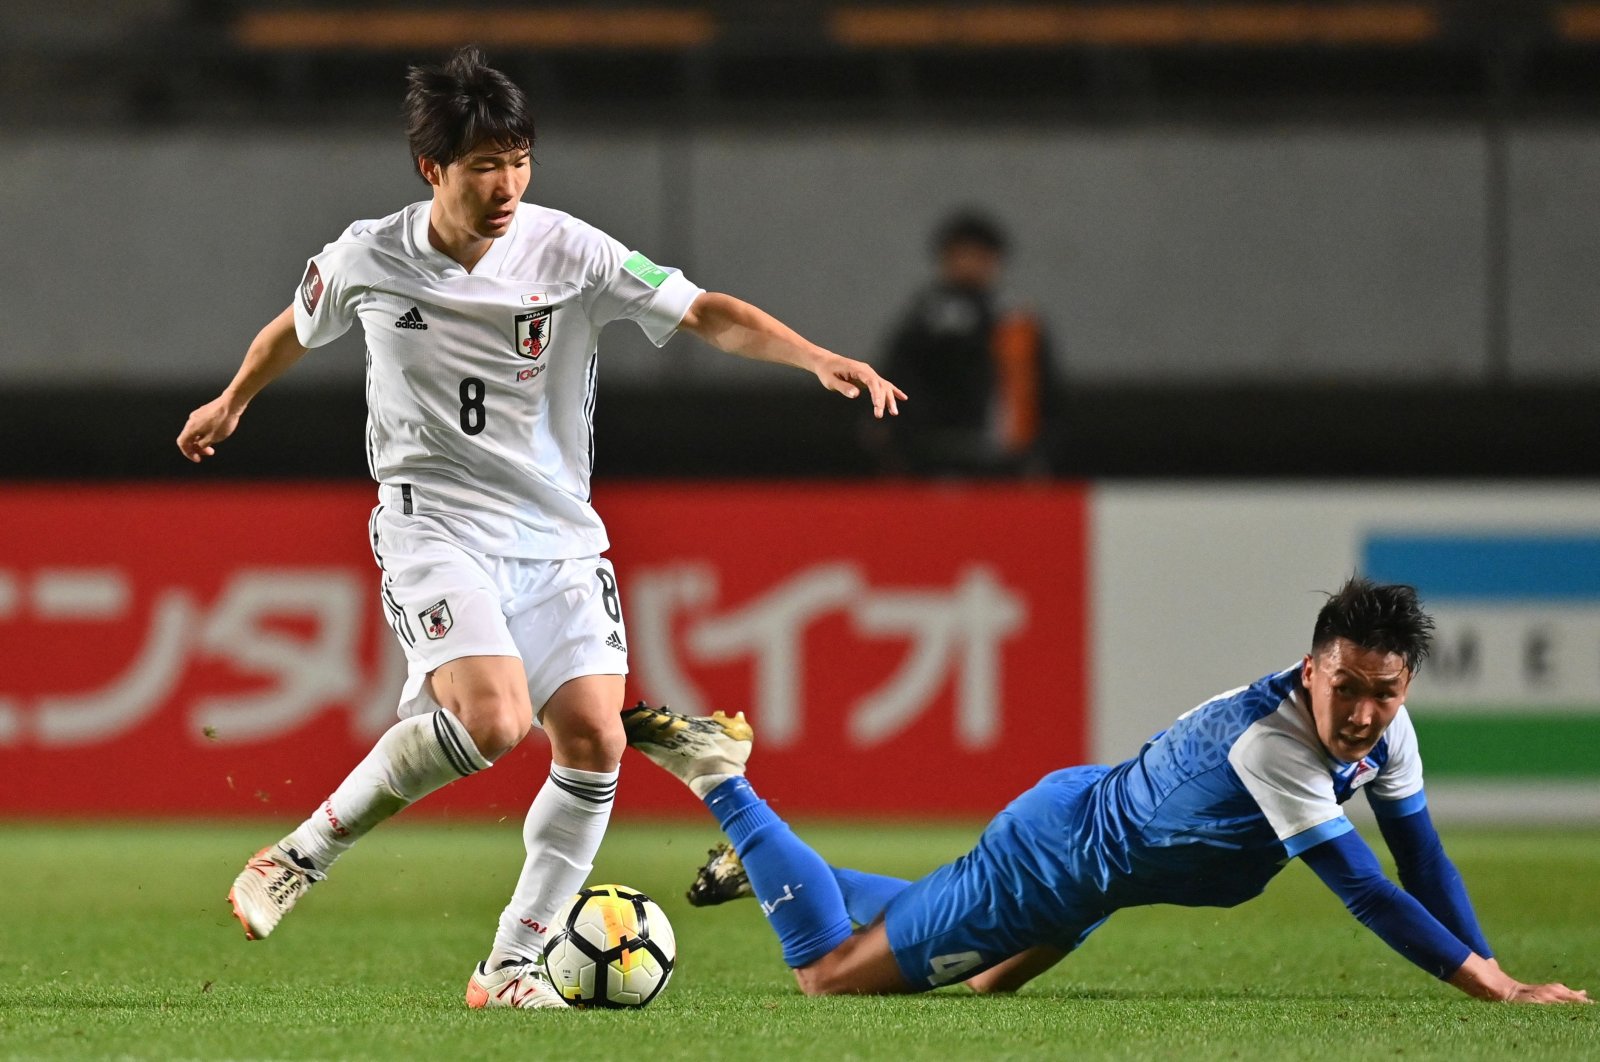 Japan's Sho Inagaki (L) competes for the ball with Mongolia's Amaraa Dulguun during the FIFA World Cup Qatar 2022 Asian zone Group F qualification match at Fuku-ari stadium, Chiba, Japan, March 30, 2021. (AFP Photo)